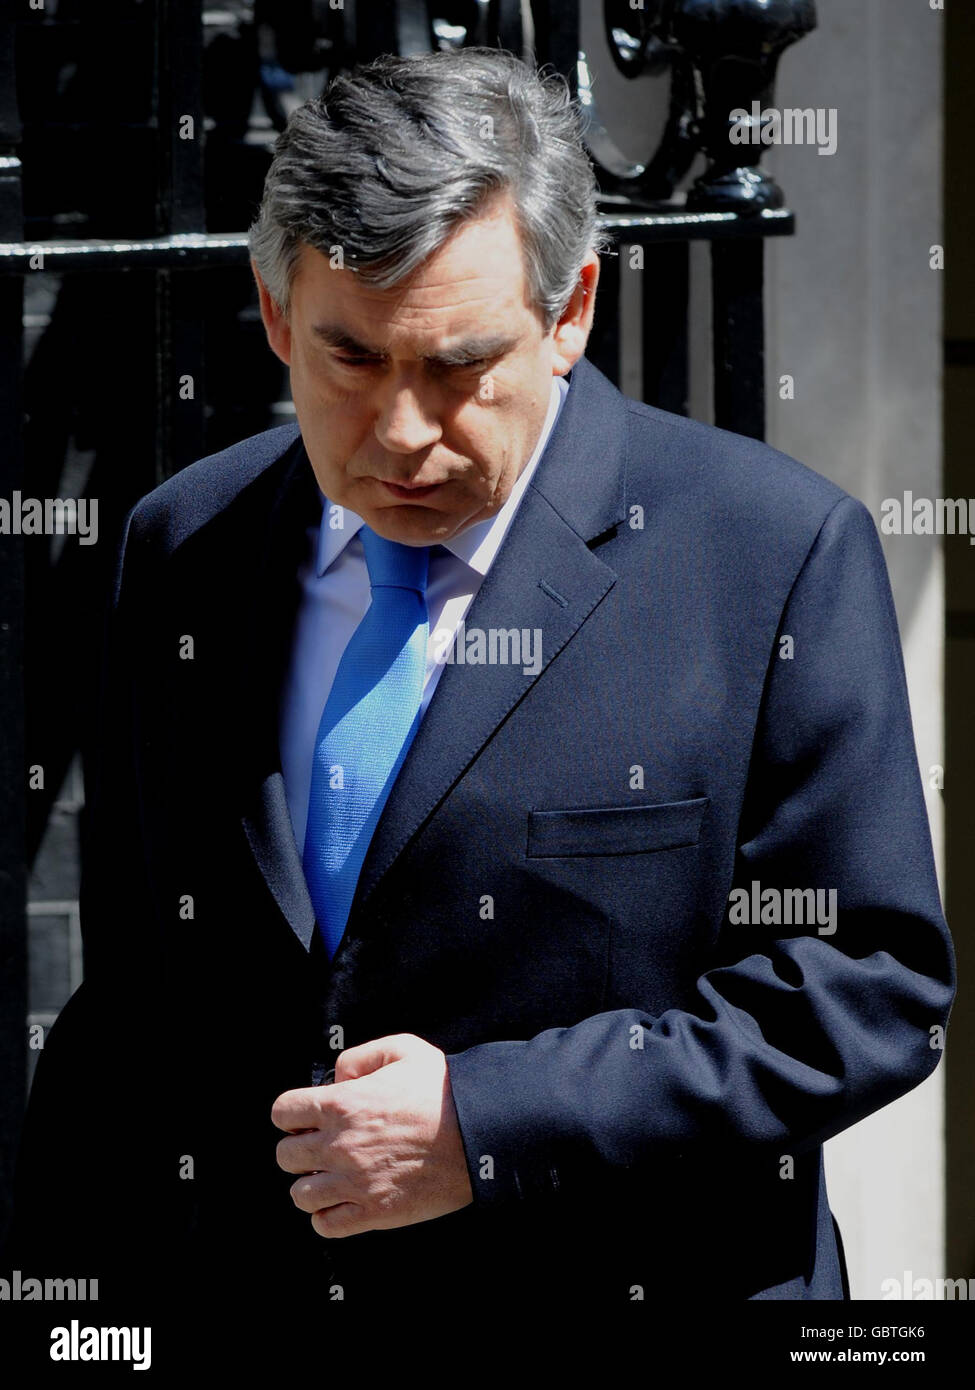 Prime Minister Gordon Brown leaves 10 Downing Street this morning on his way to the House of Commons to face this week's Prime Minister's Questions. Picture date: Wednesday June 24, 2009. See PA story POLITICS PMQs Brown. Photo credit should read: Stefan Rousseau/PA Stock Photo